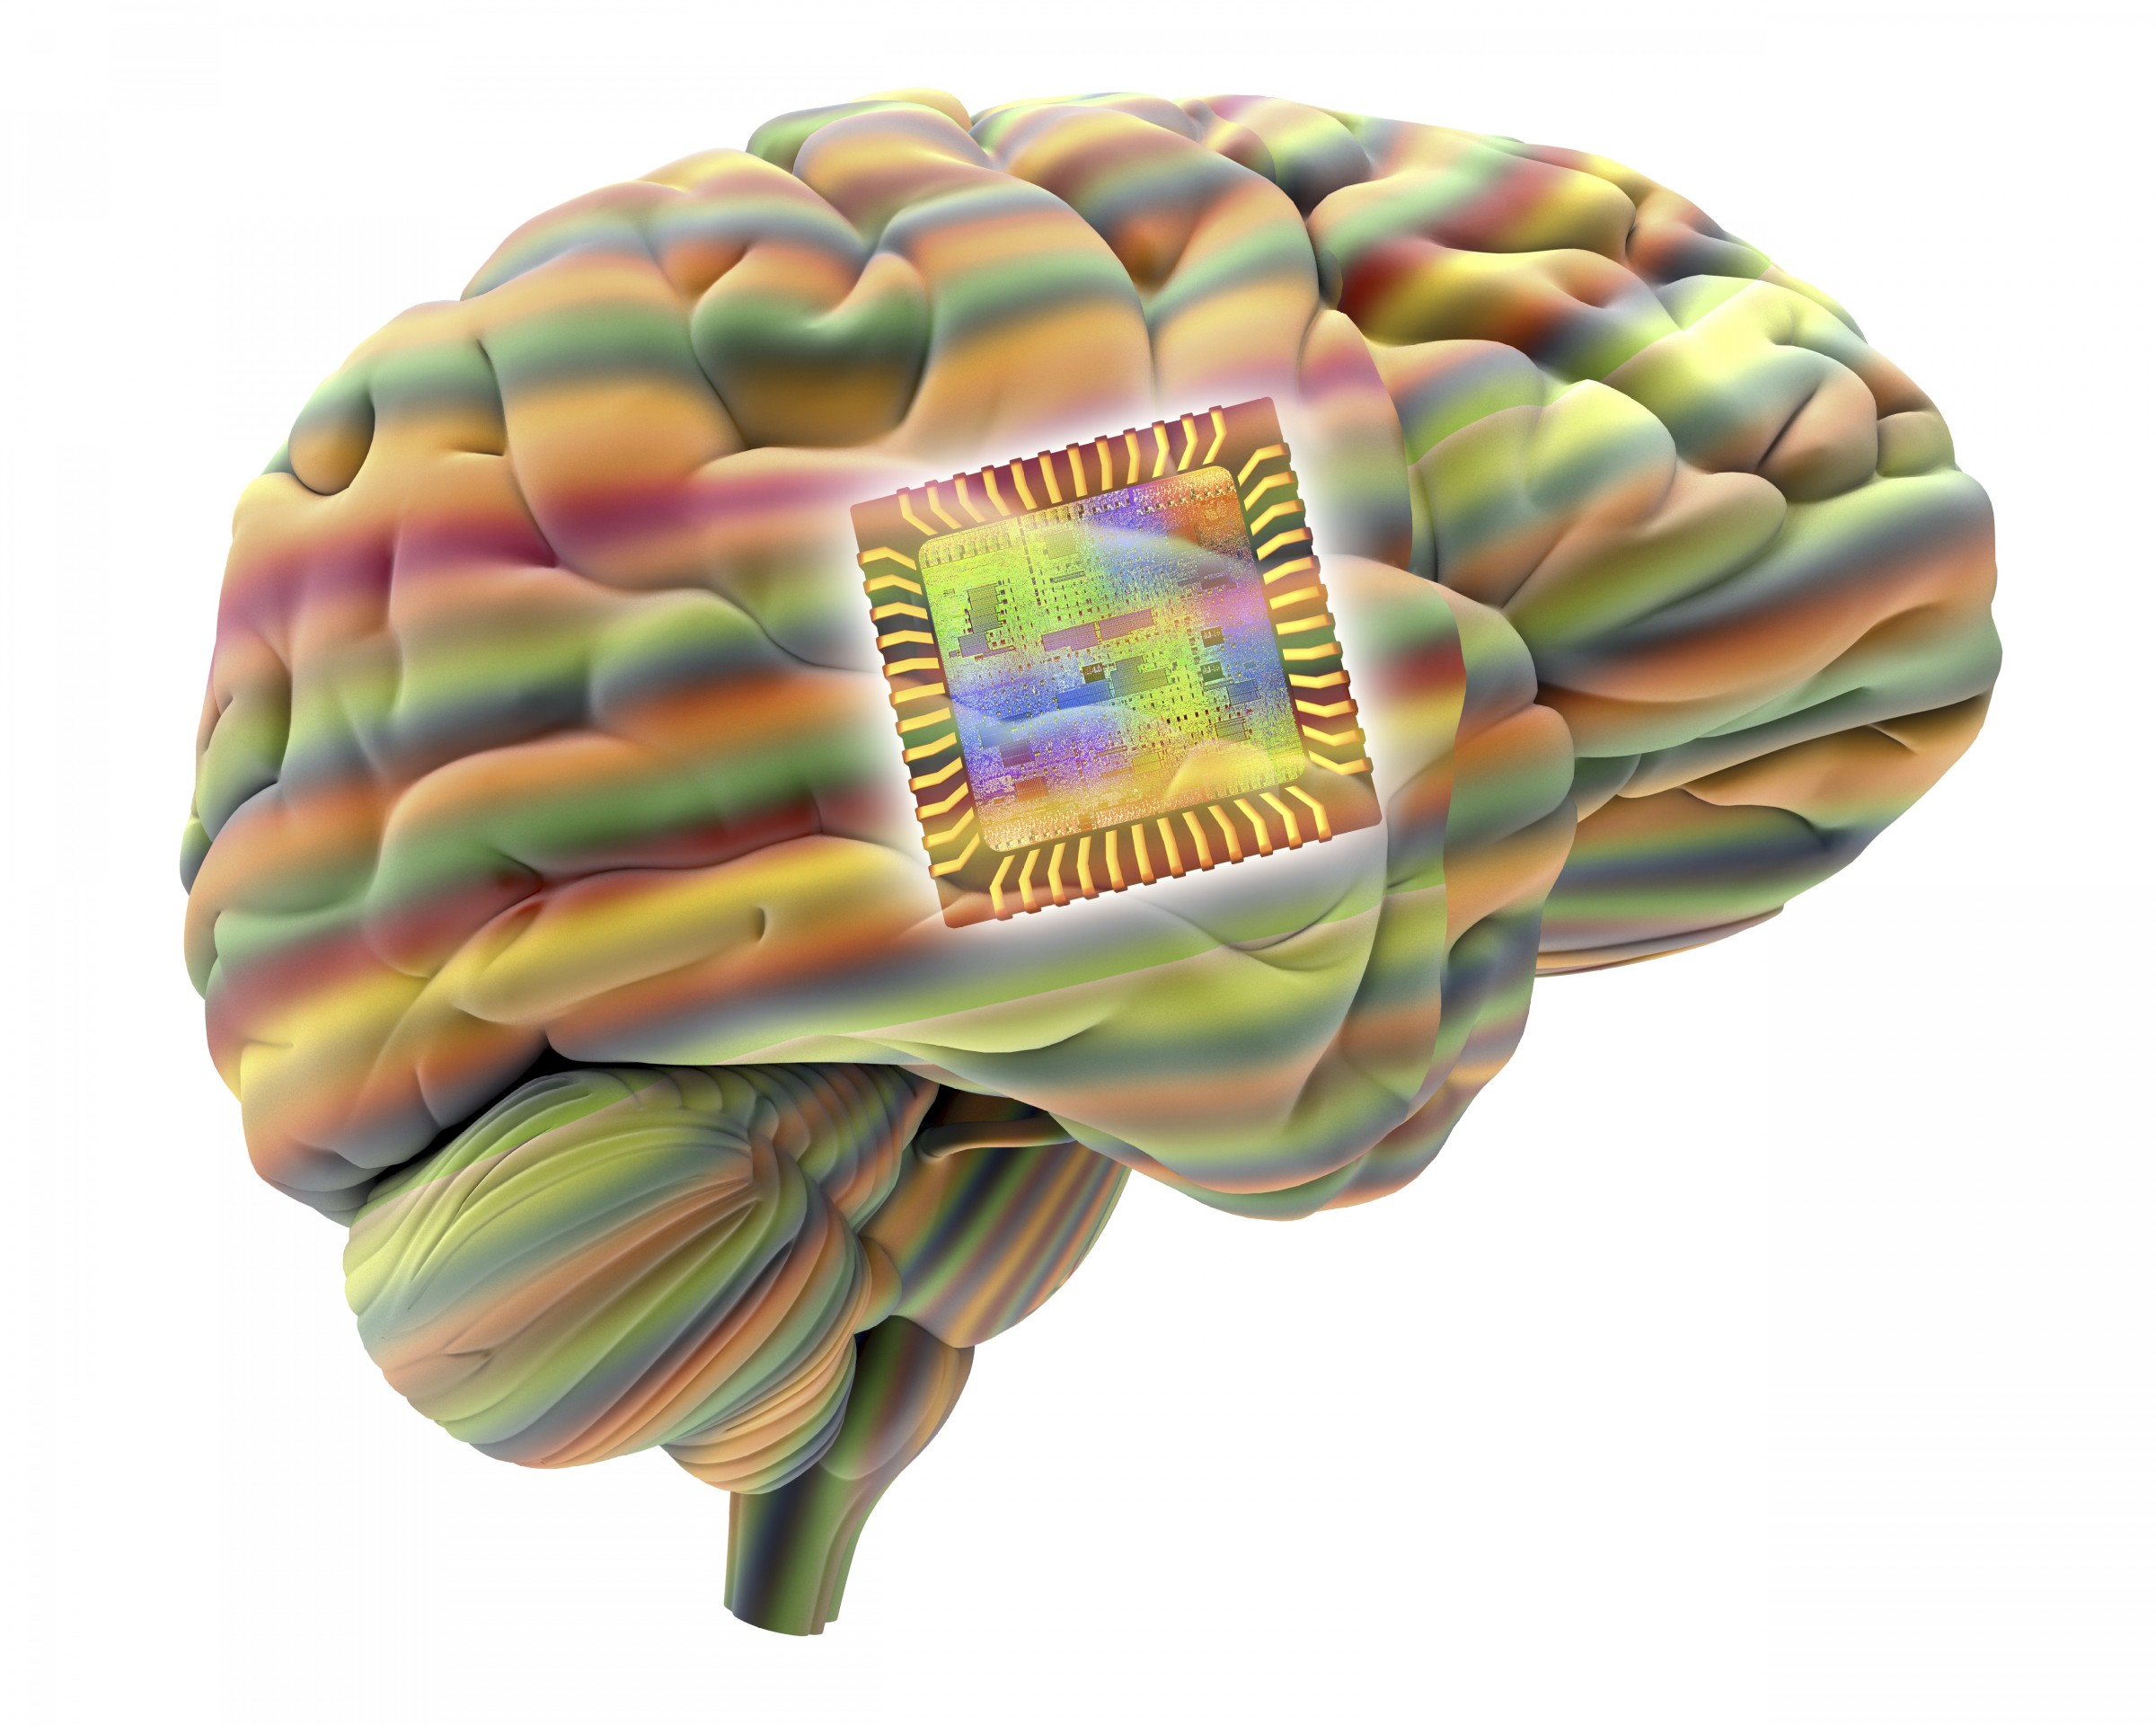 Illustration of brain with implanted chip